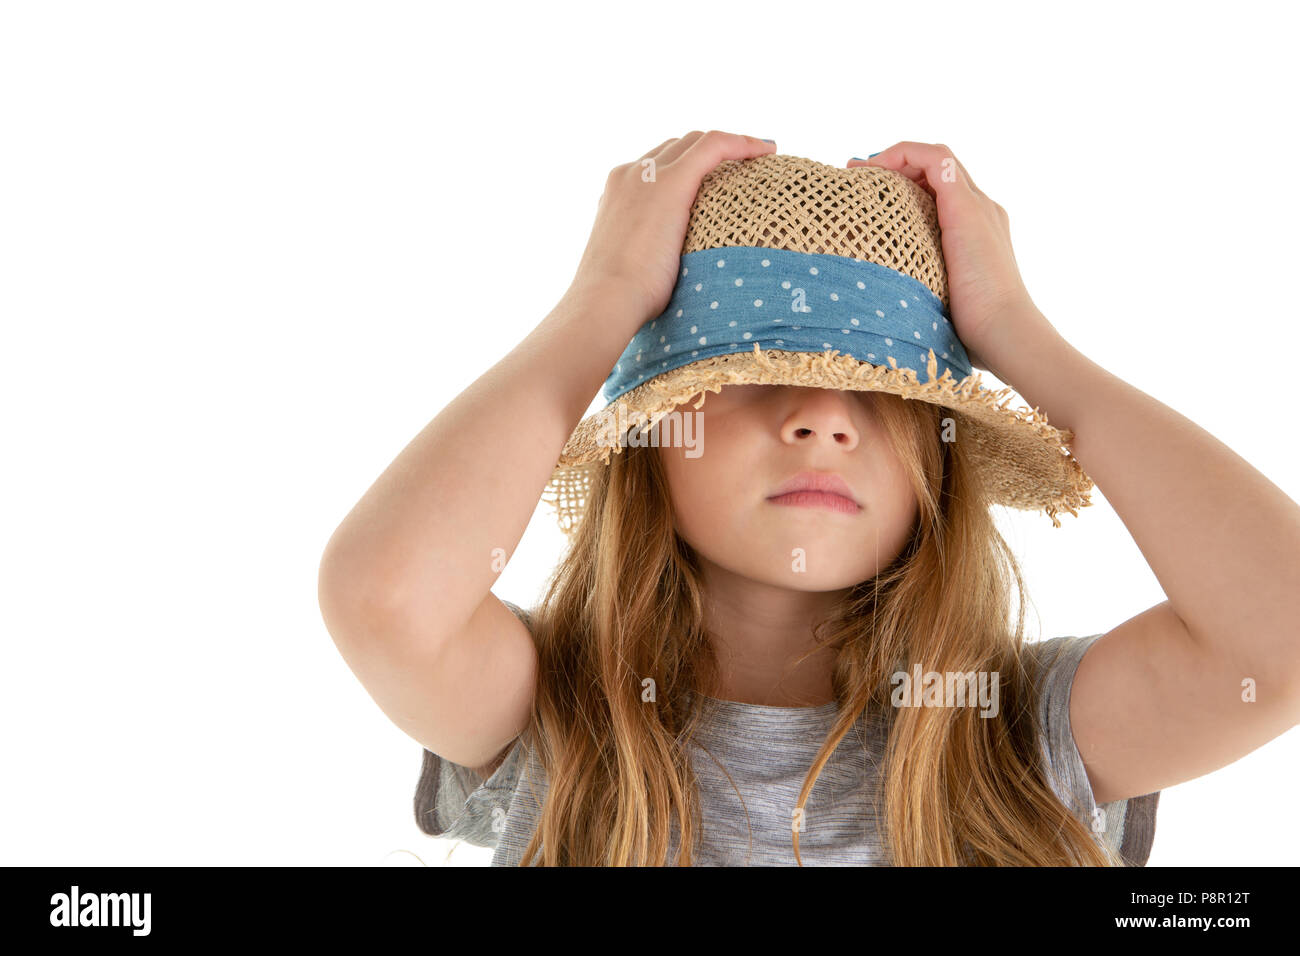 Funny little girl hiding underneath her straw hat pushing the crown down on her head with her hands in embarrassment isolated on white Stock Photo